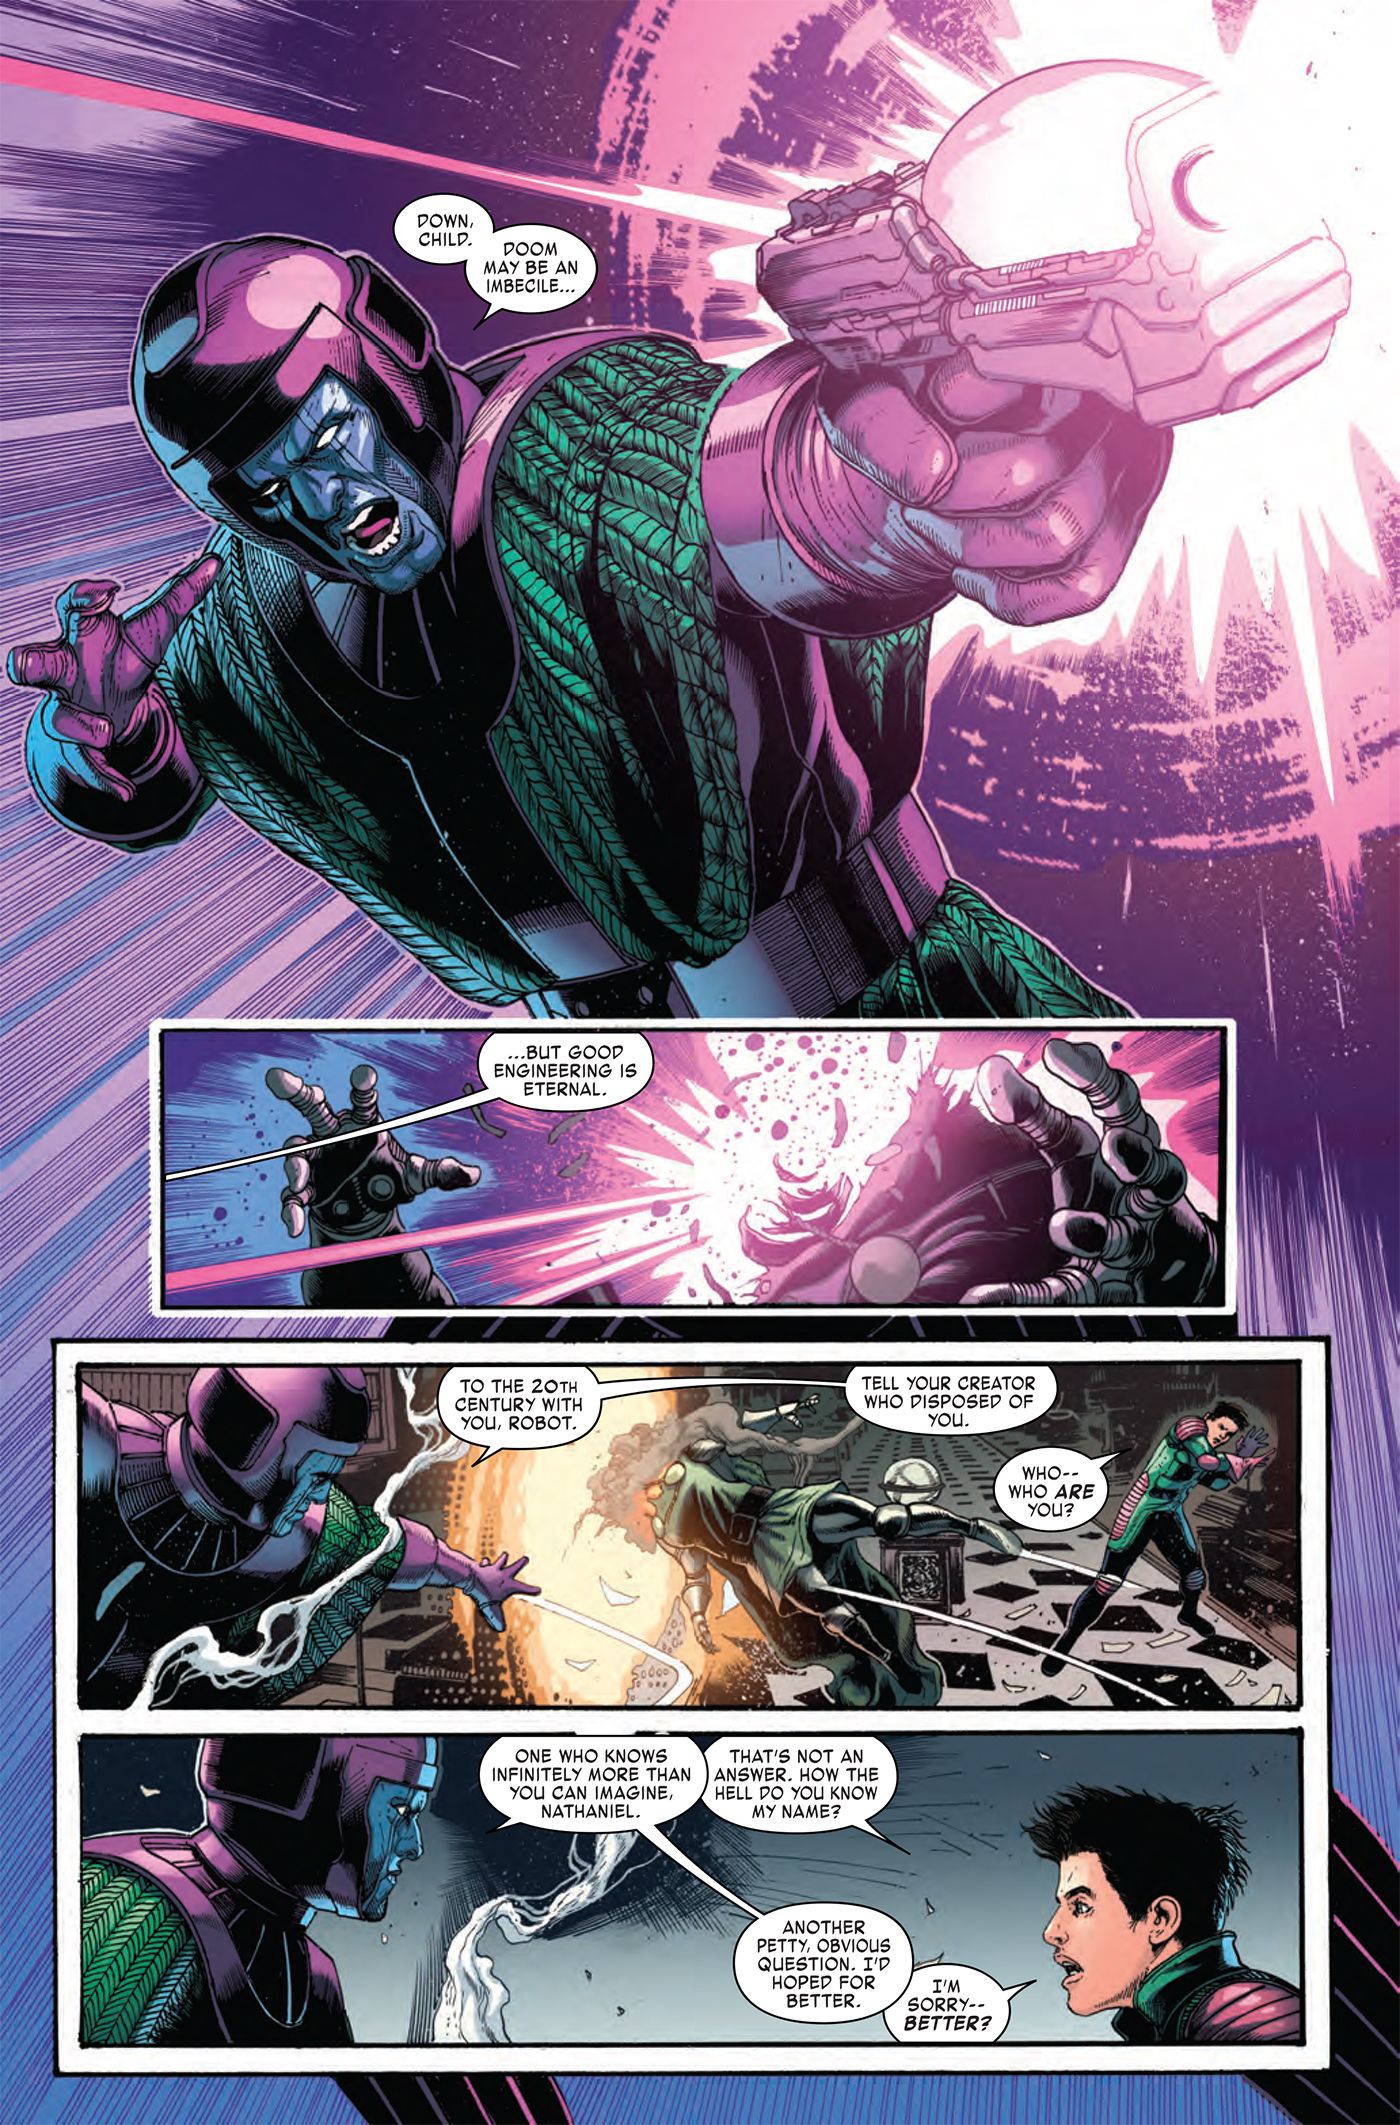 Kang the Conqueror is revealed to be the savior of his younger self.